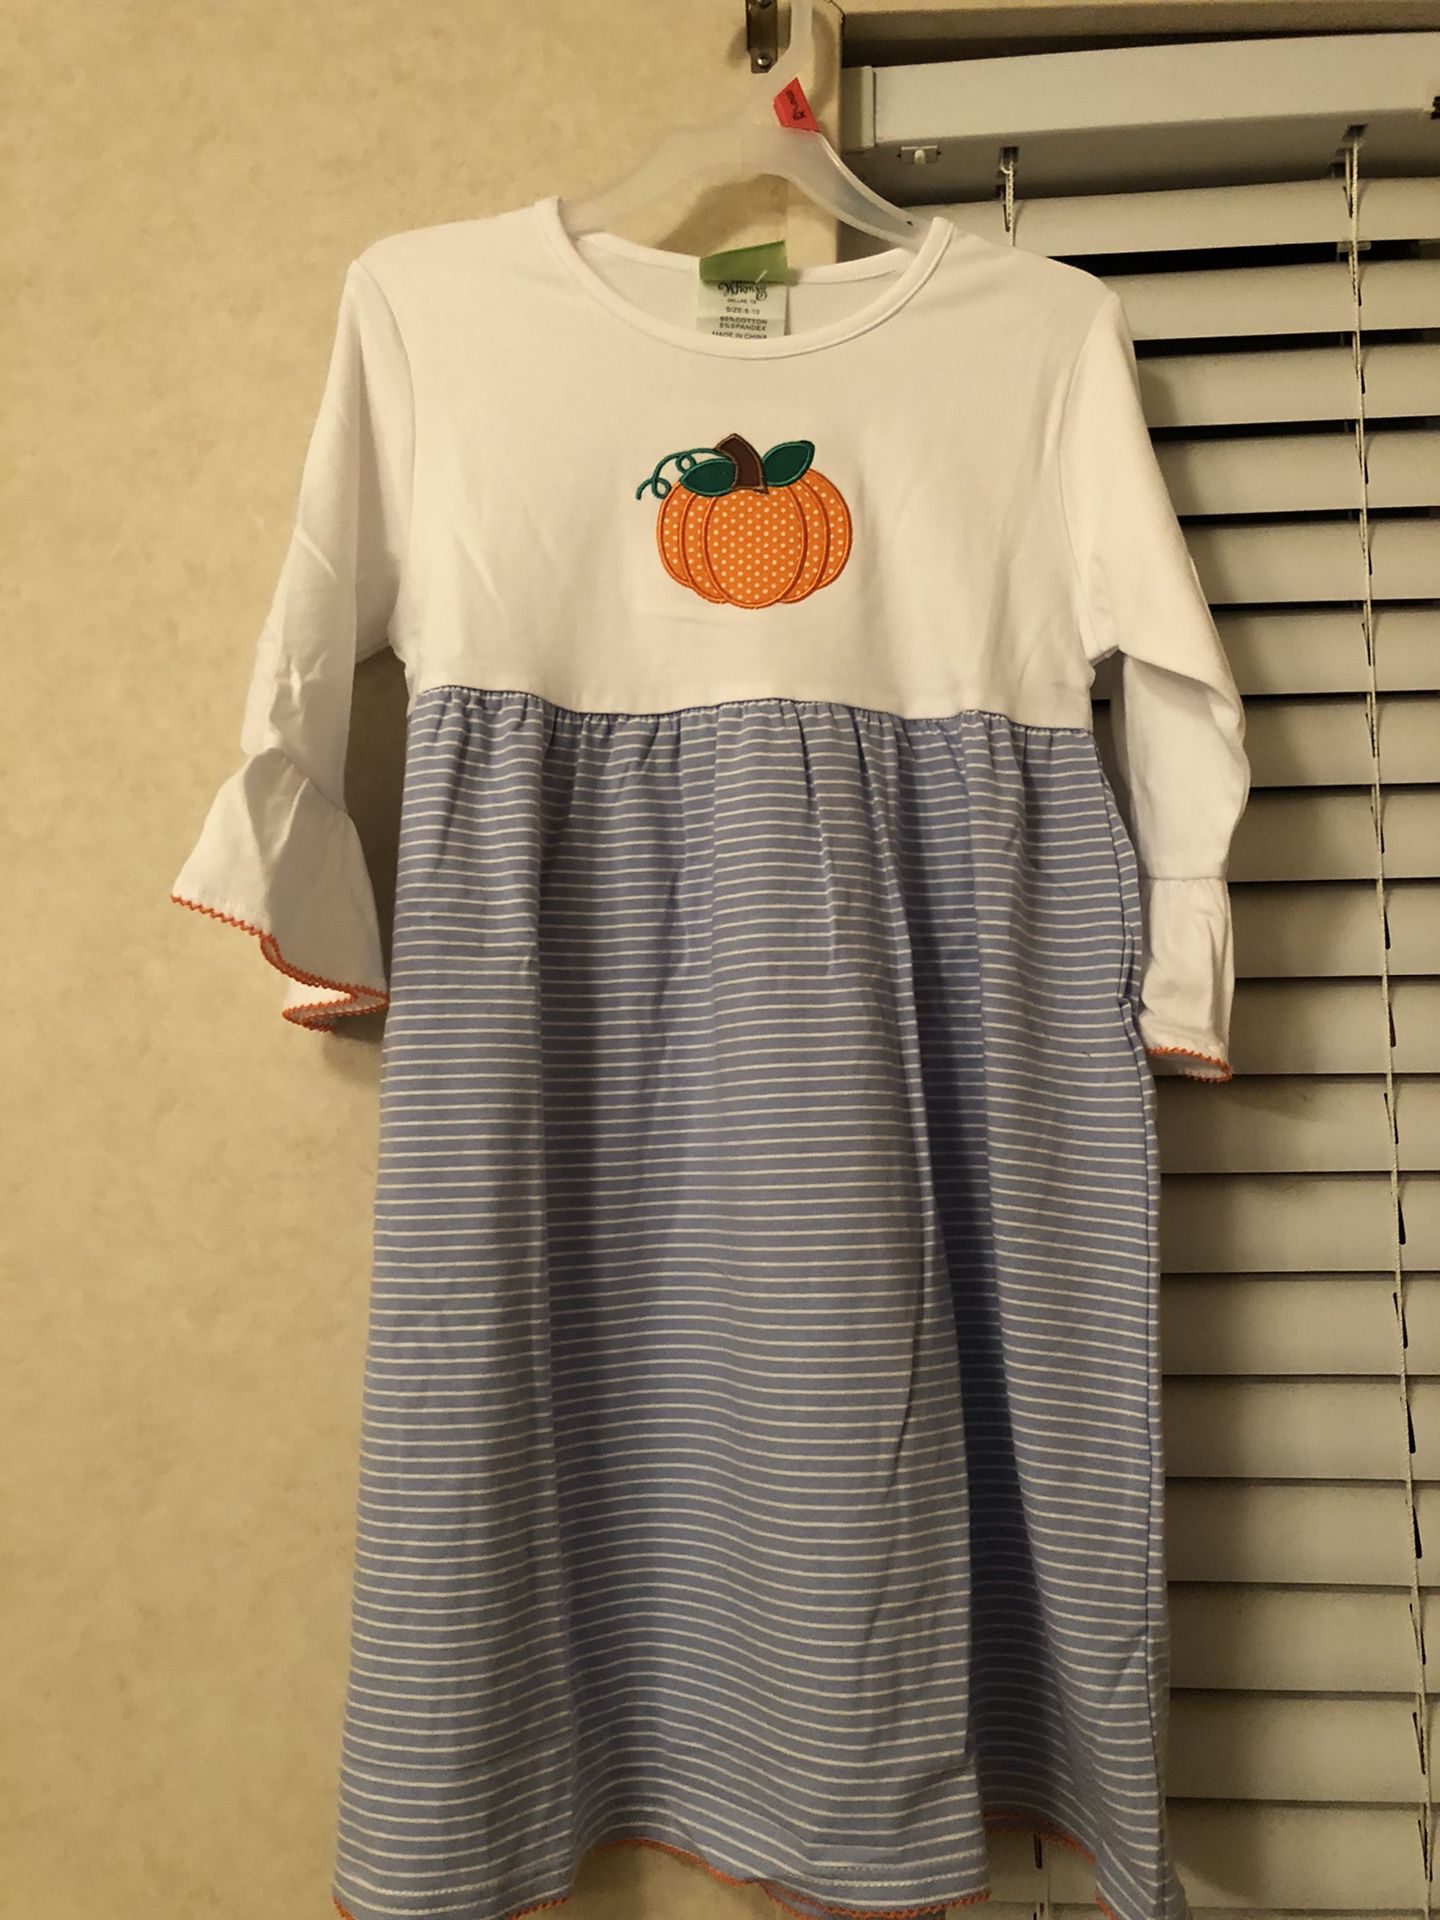 Girl’s NWT Classic Whimsey Dress size 8/10